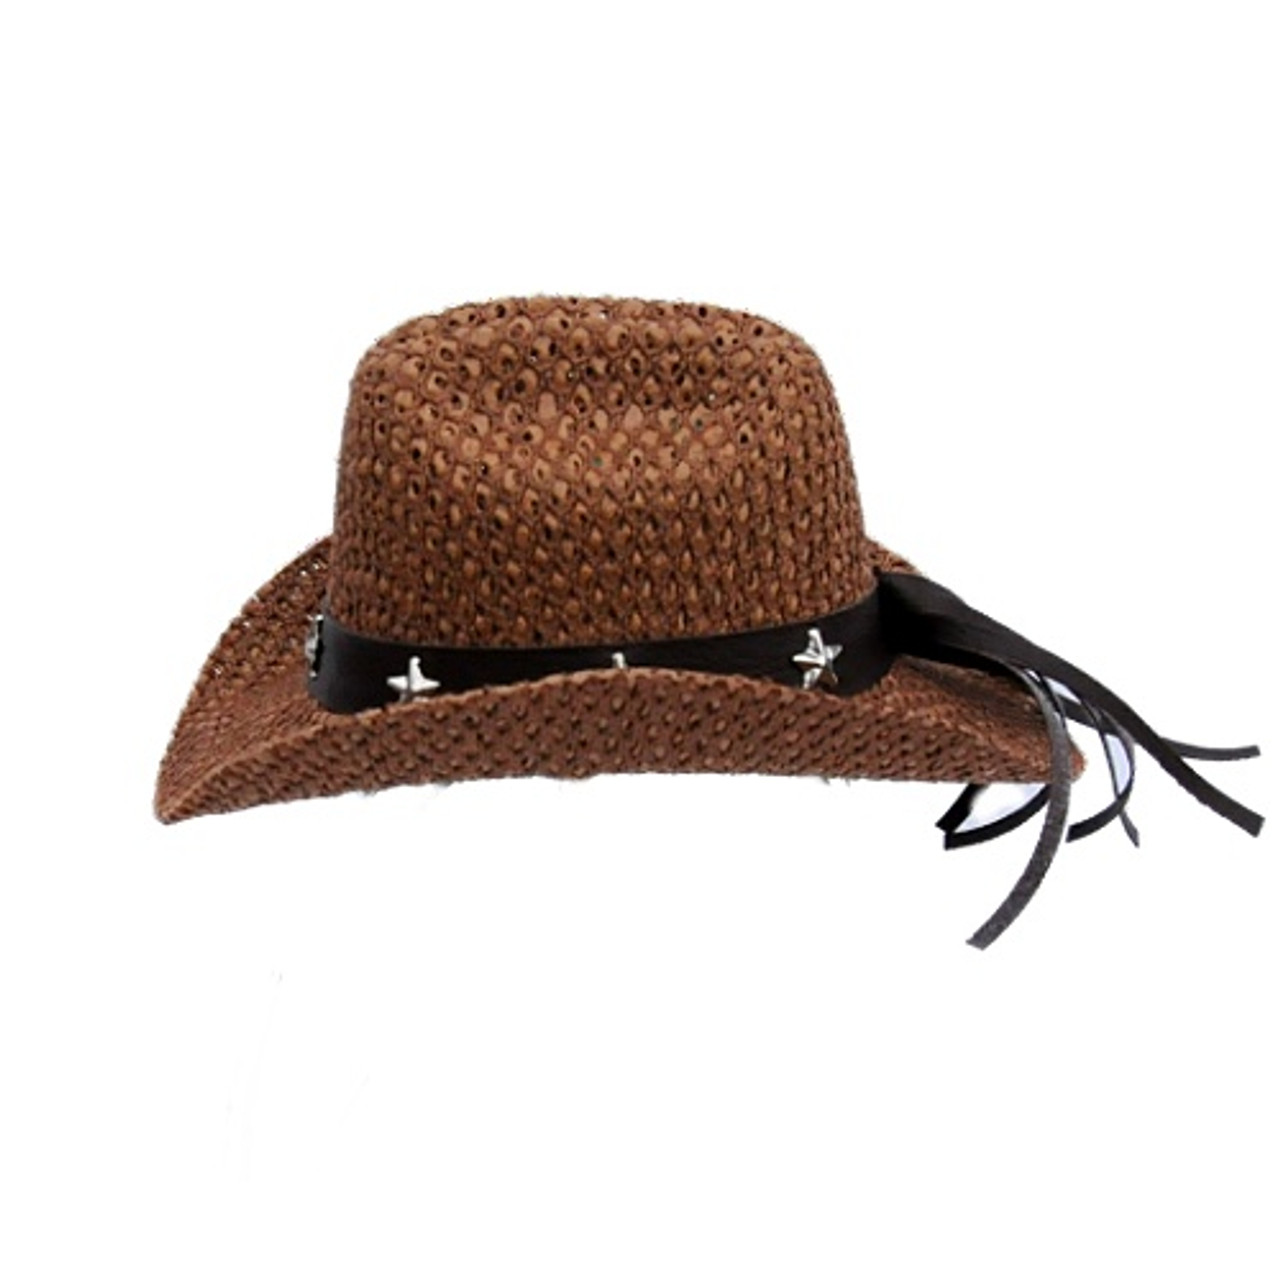 Skull and Crossbones Hat Band | Black and Silver Hat Band | Adjustable Hat Band Brown